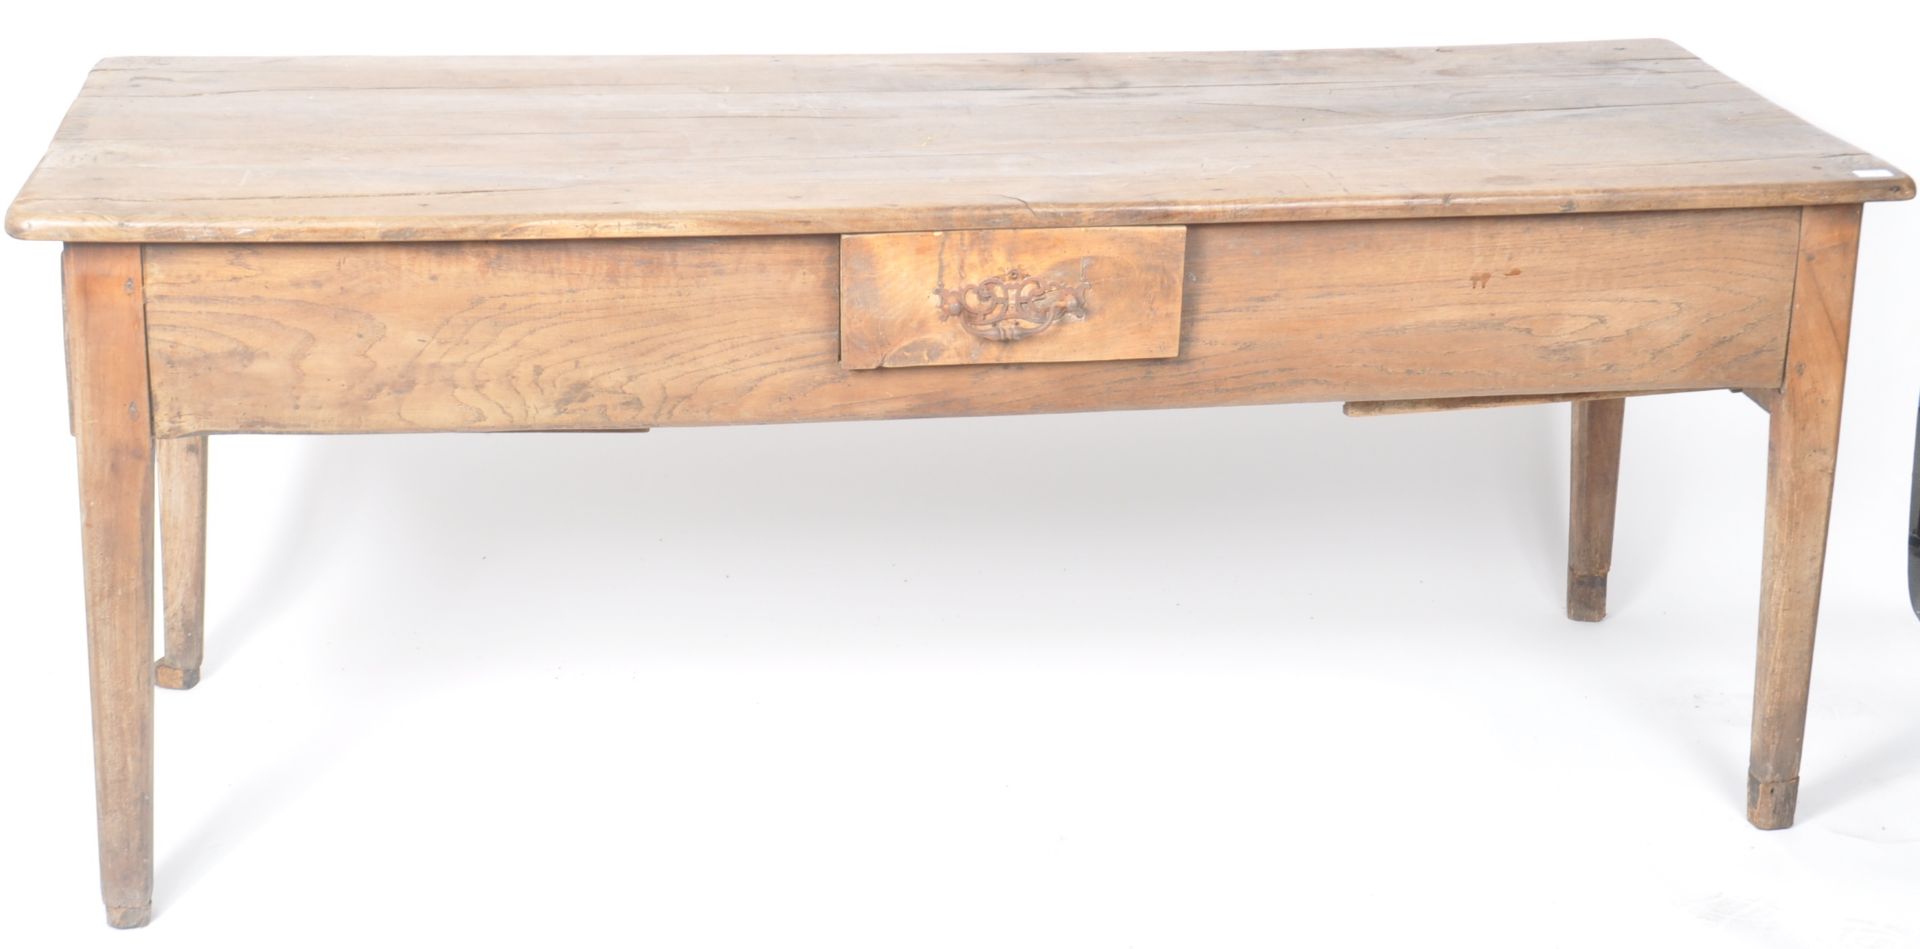 18TH CENTURY CENTURY FRENCH FARMHOUSE OAK DINING TABLE - Image 2 of 8